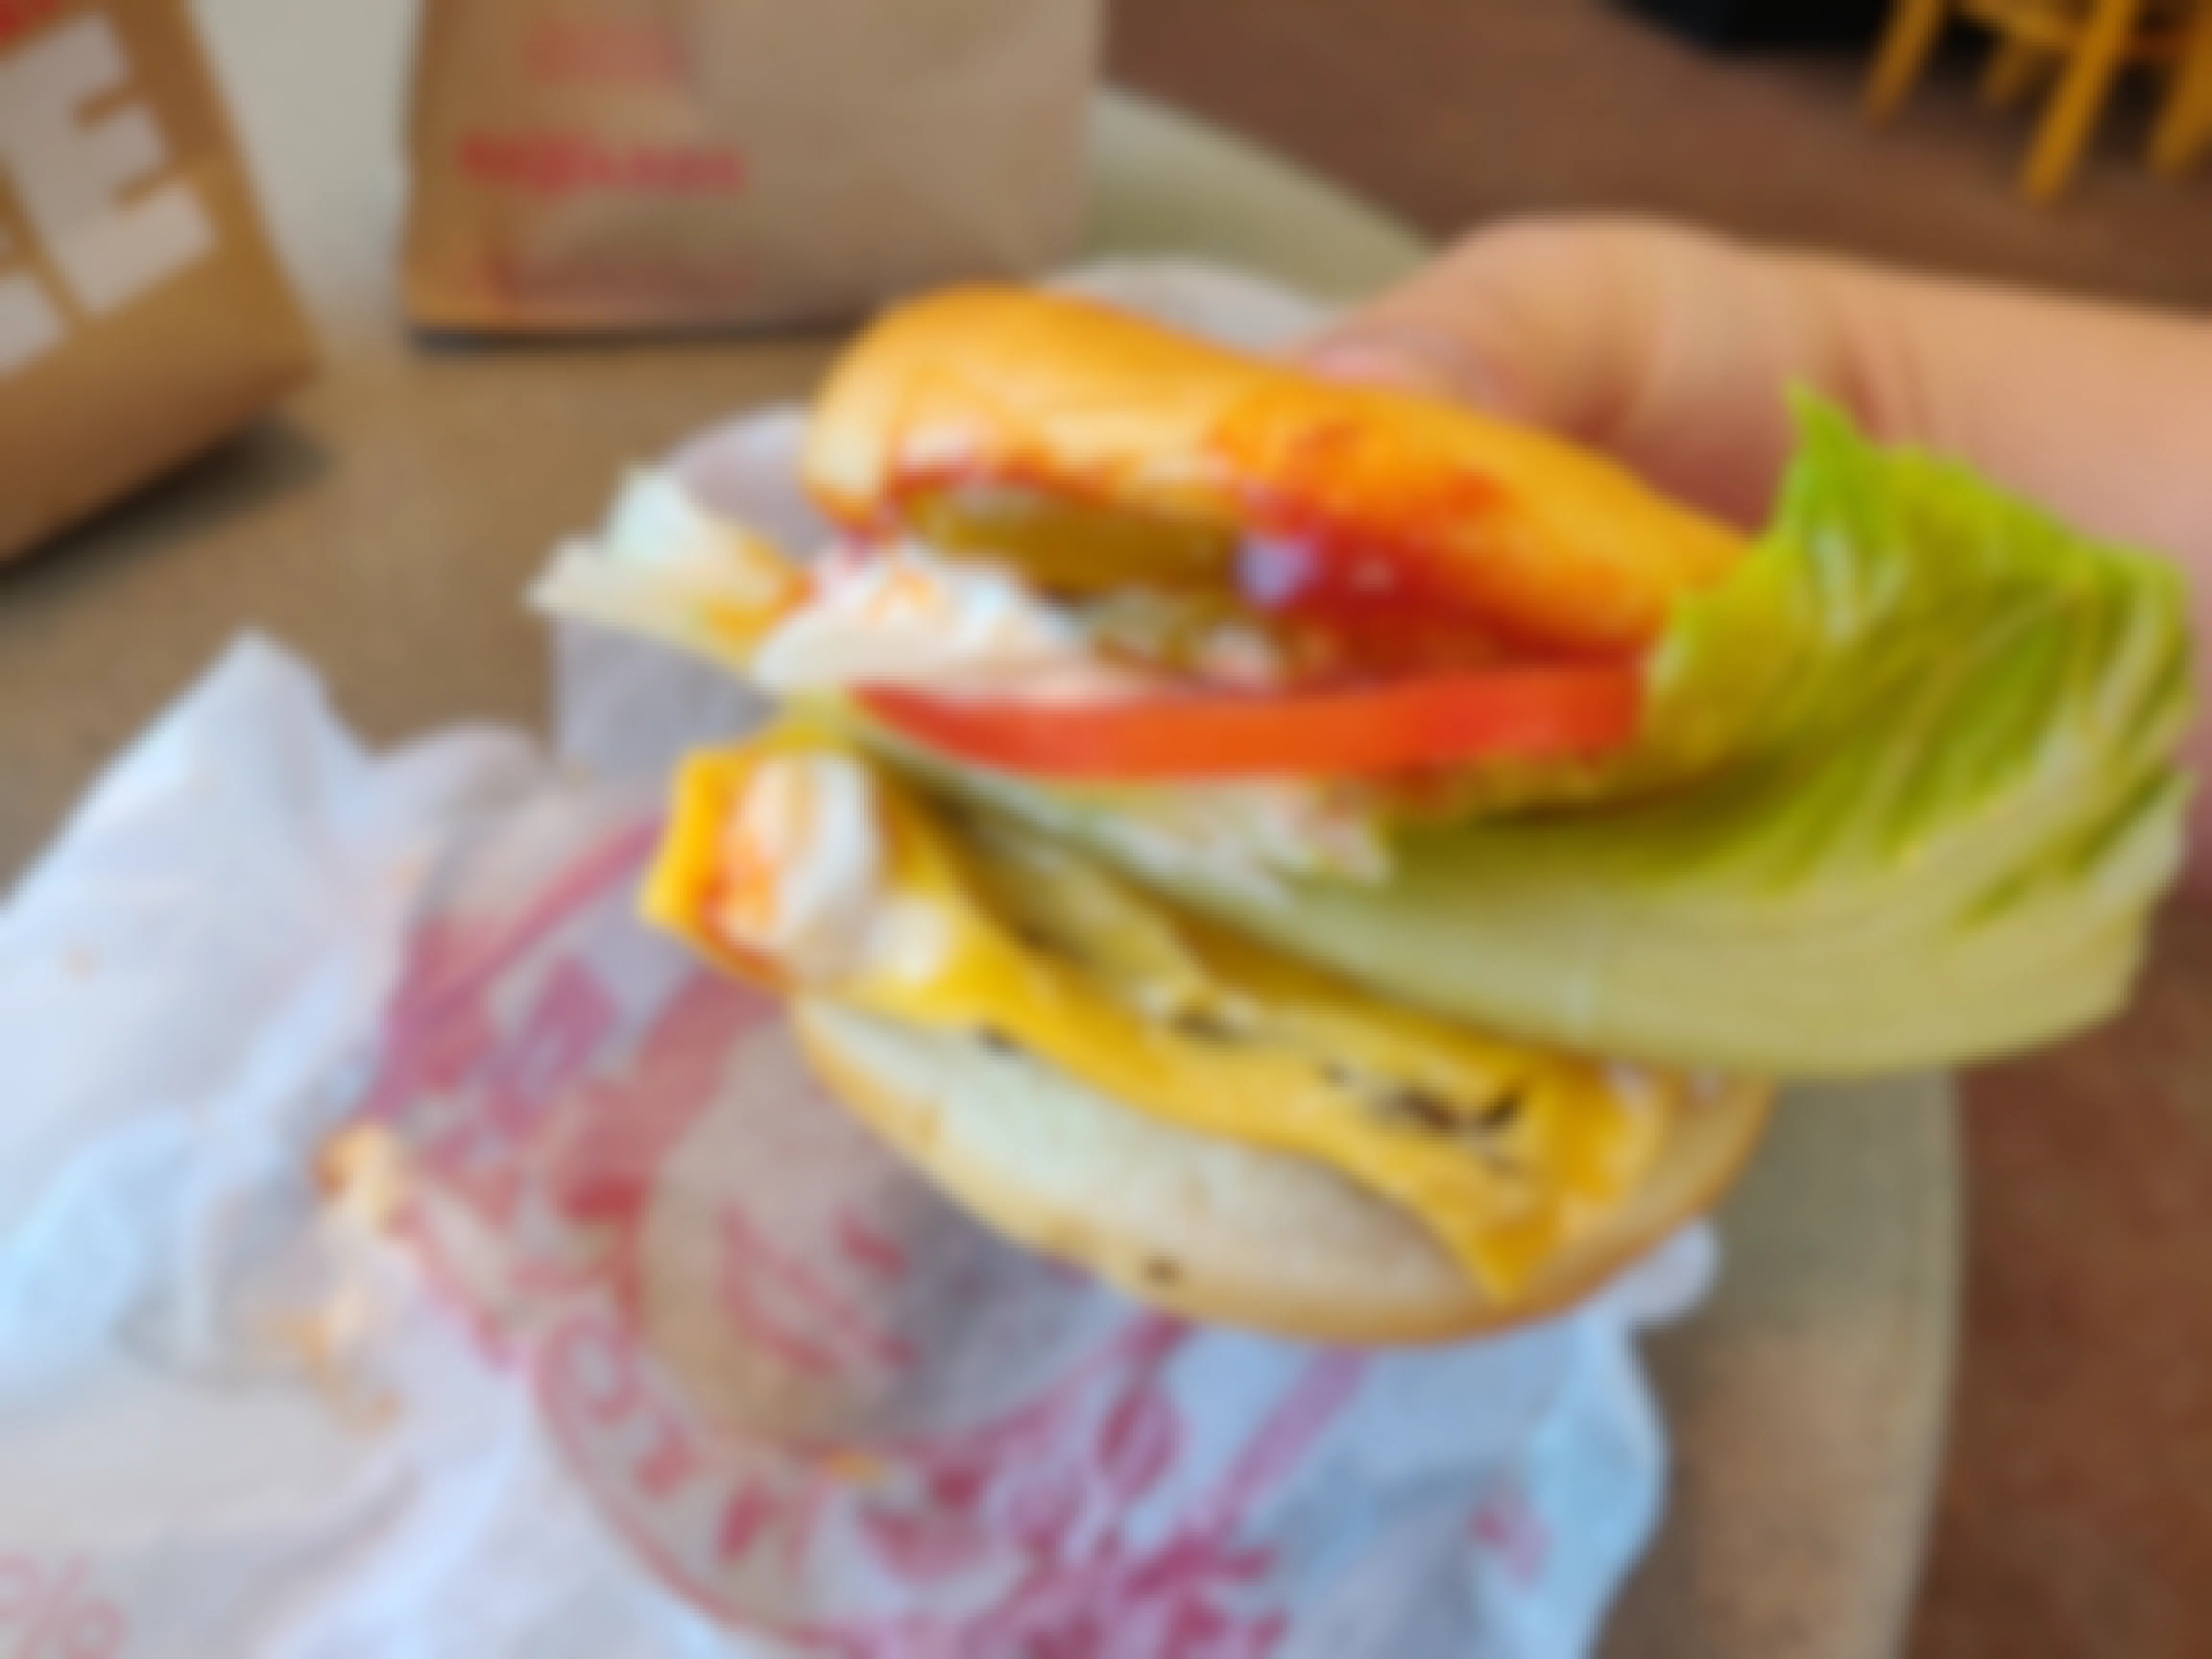 A person's hand holding a Wendy's Jr. Cheeseburger with extra lettuce and tomatoes.